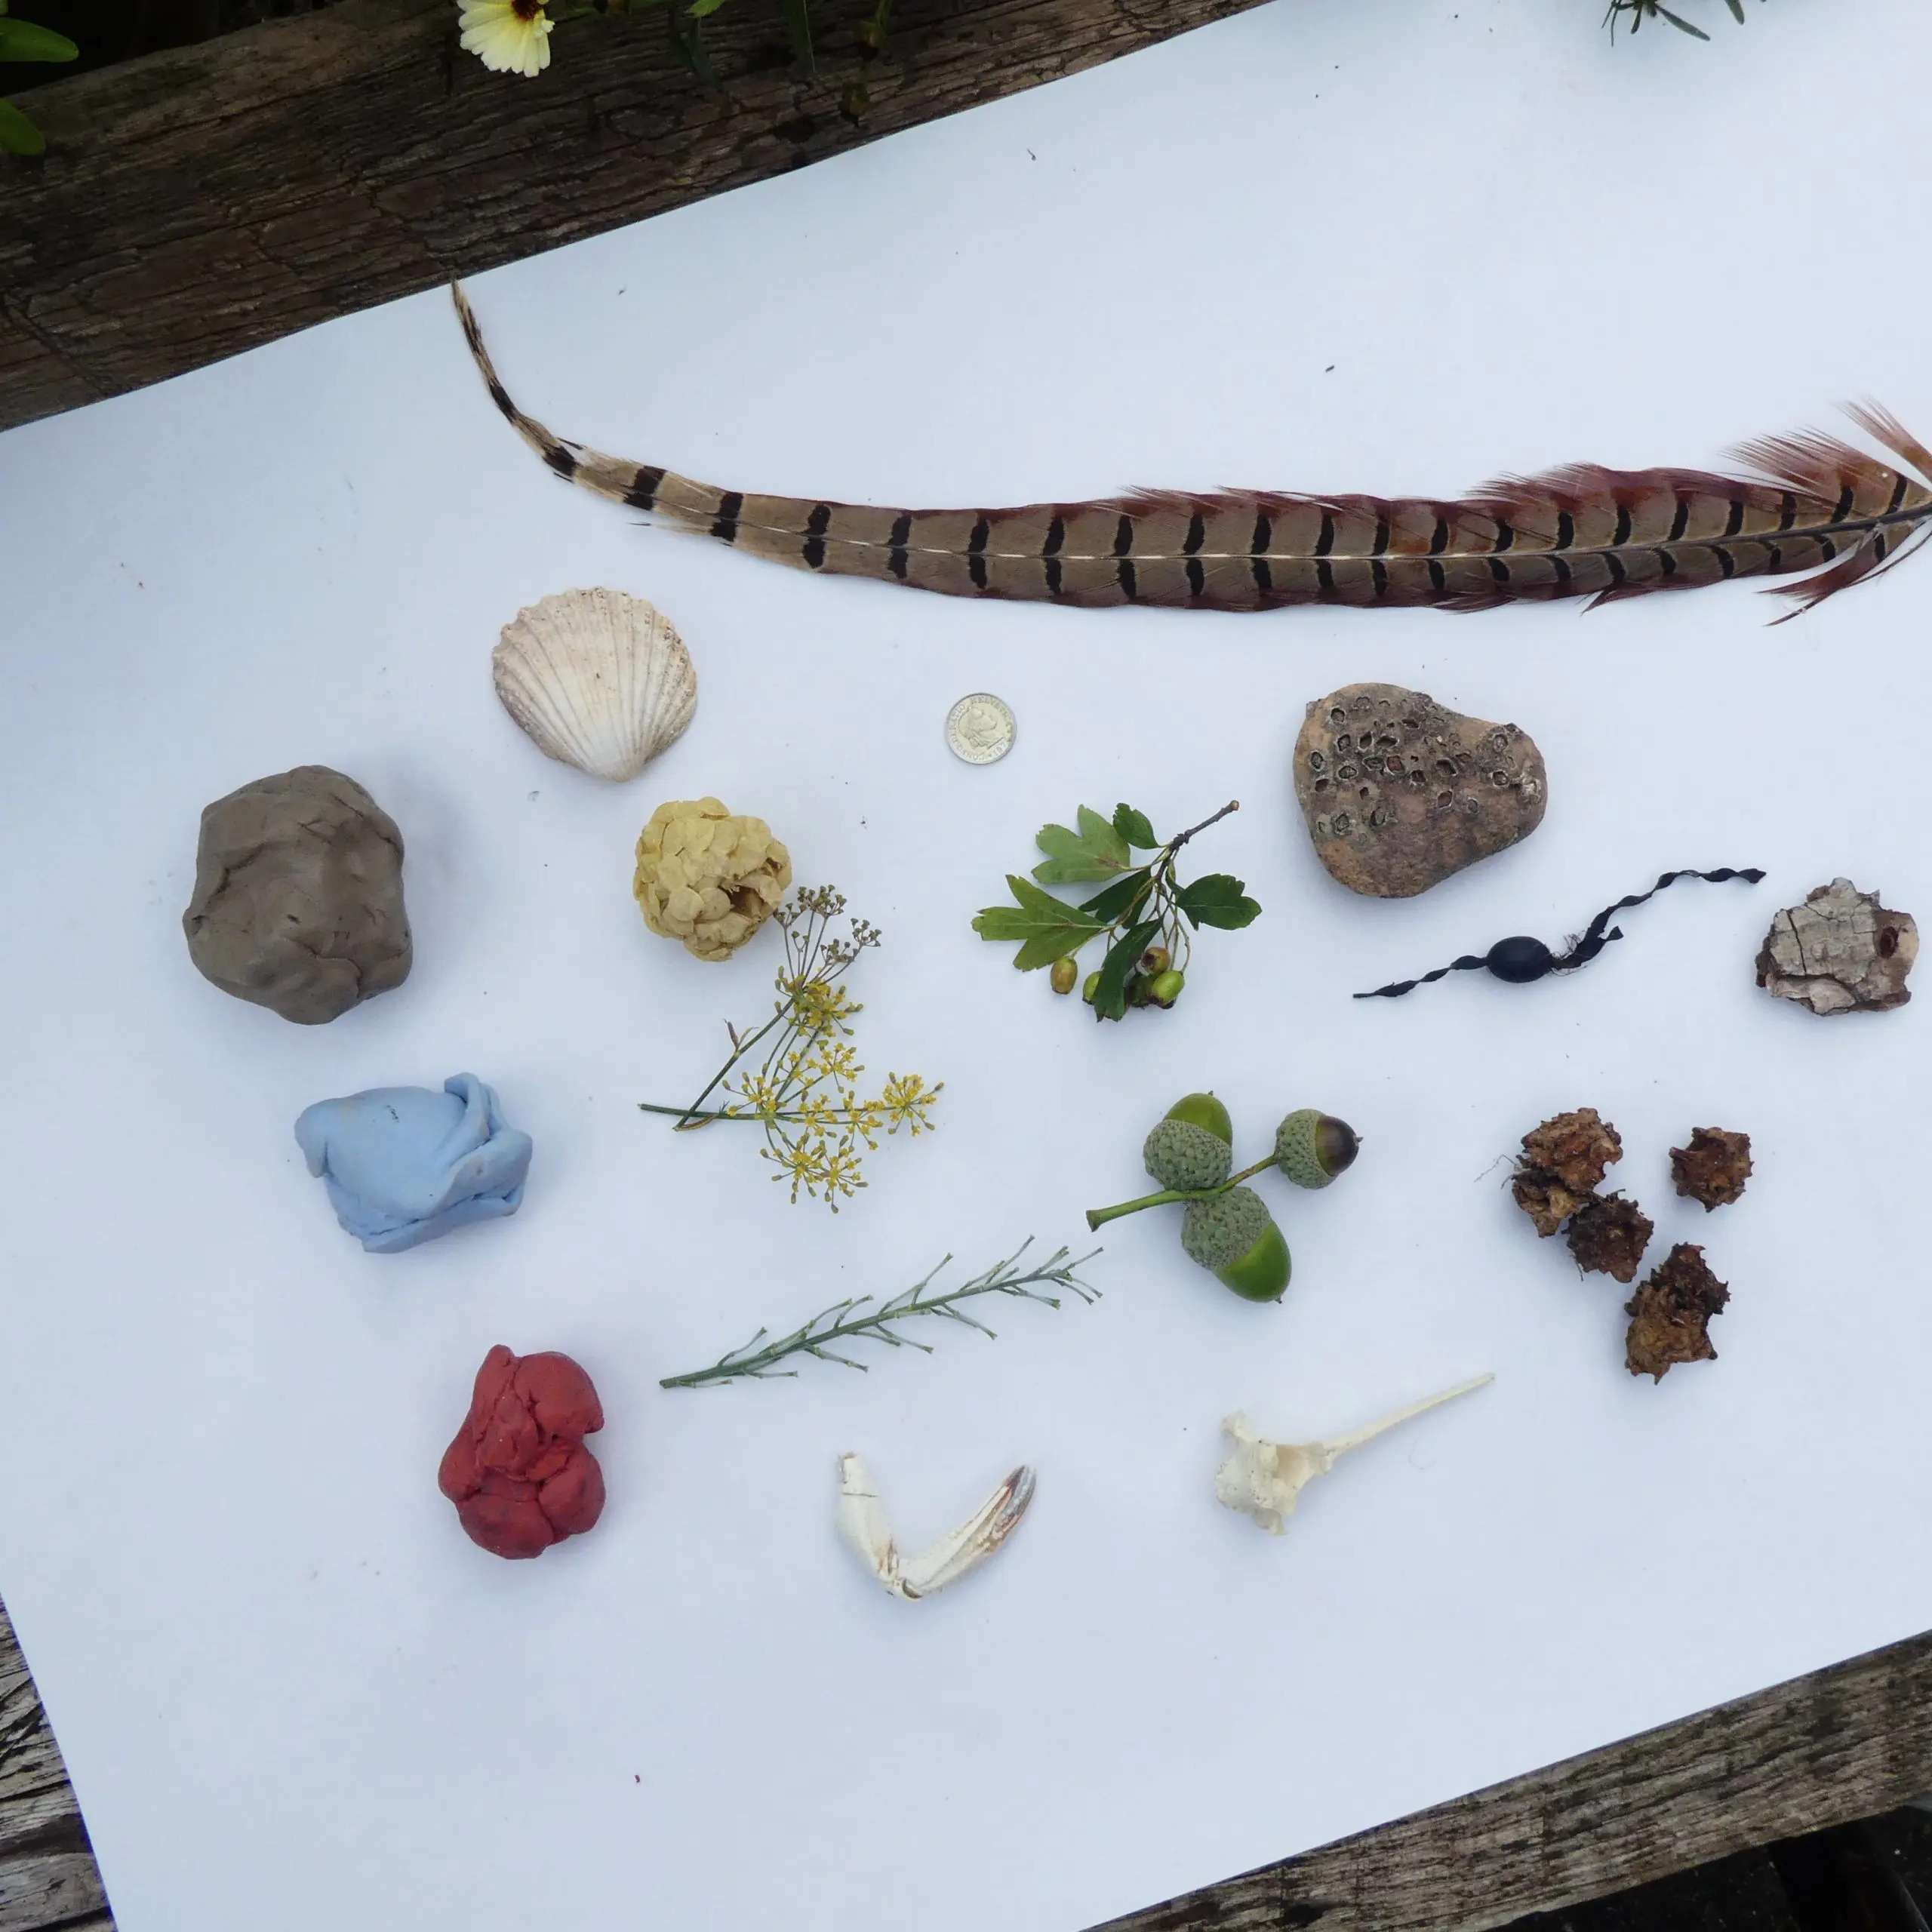 A collection of blutack, seed heads and feathers